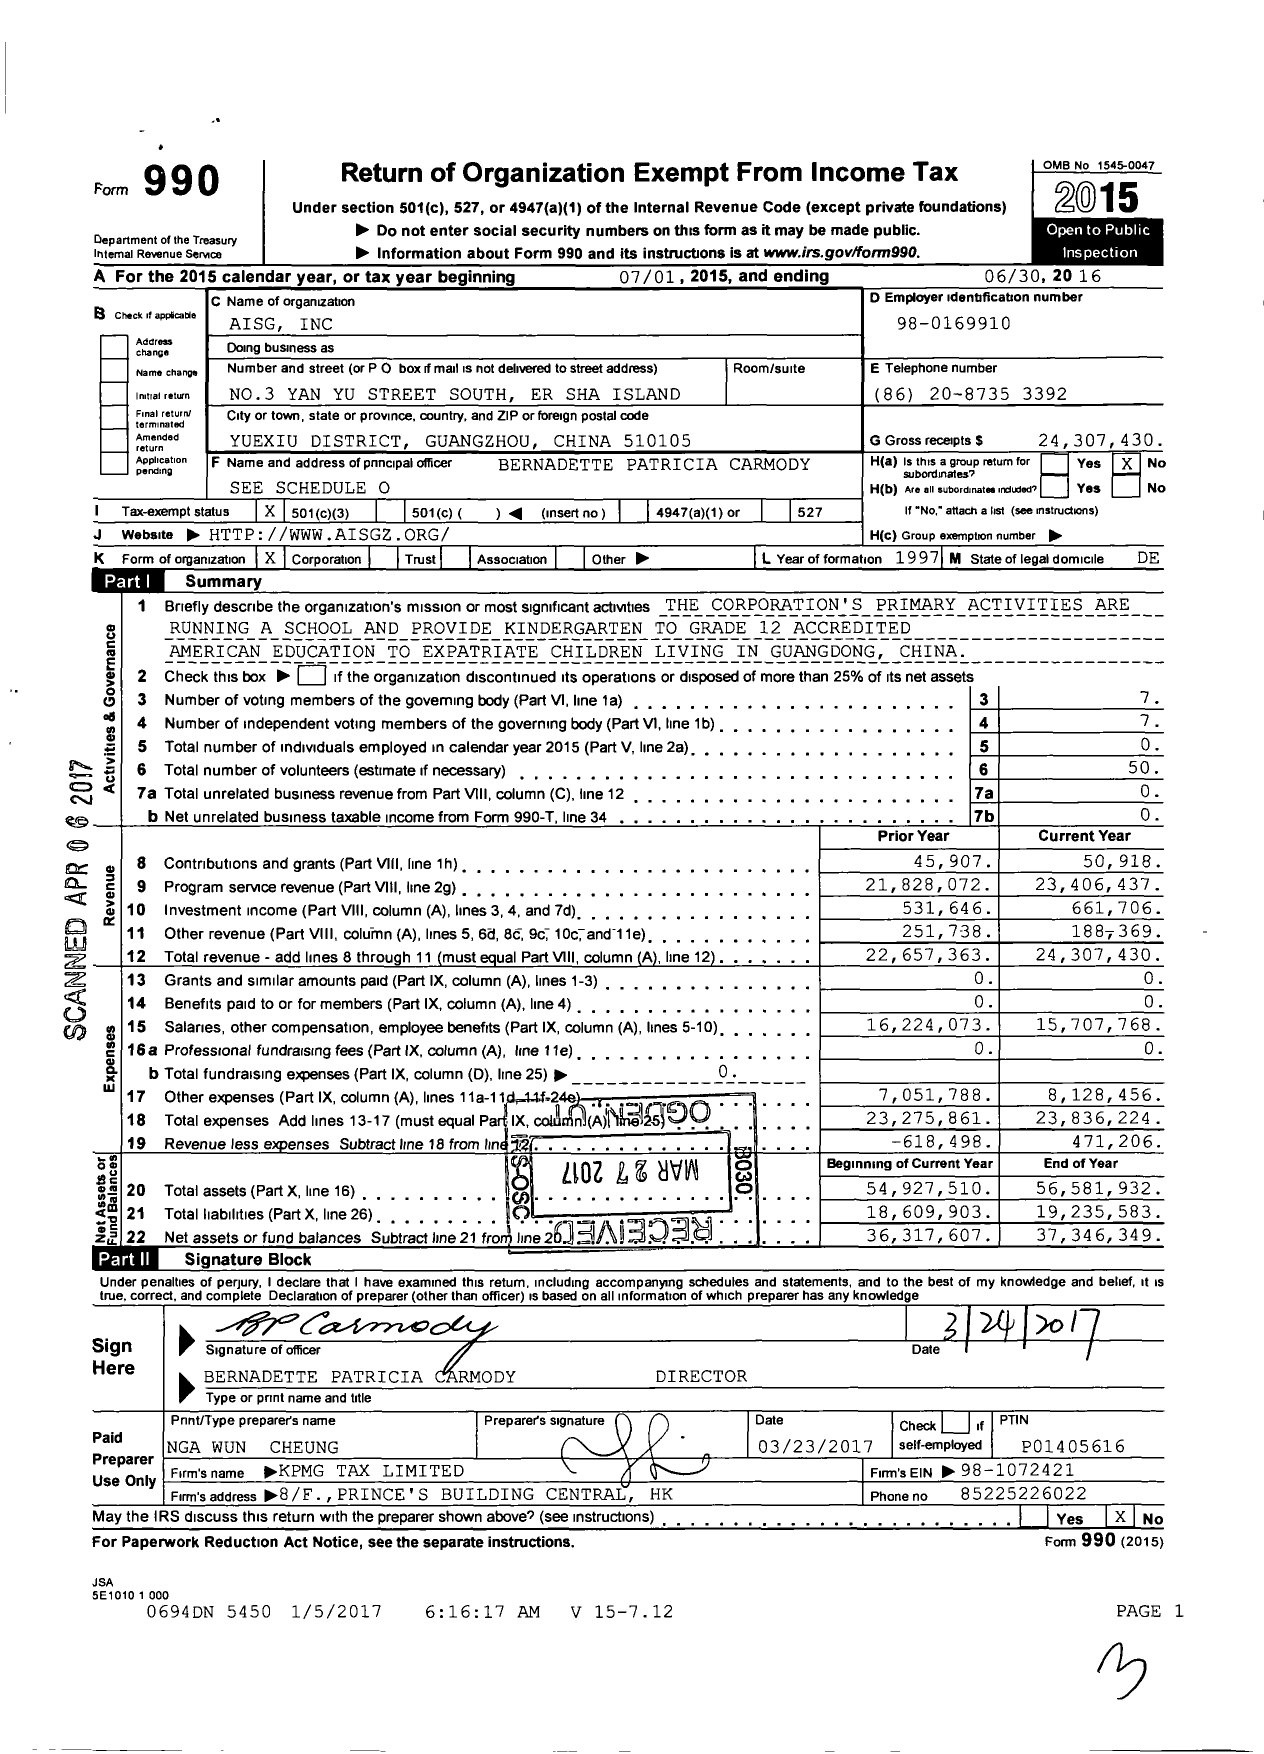 Image of first page of 2015 Form 990 for Aisg